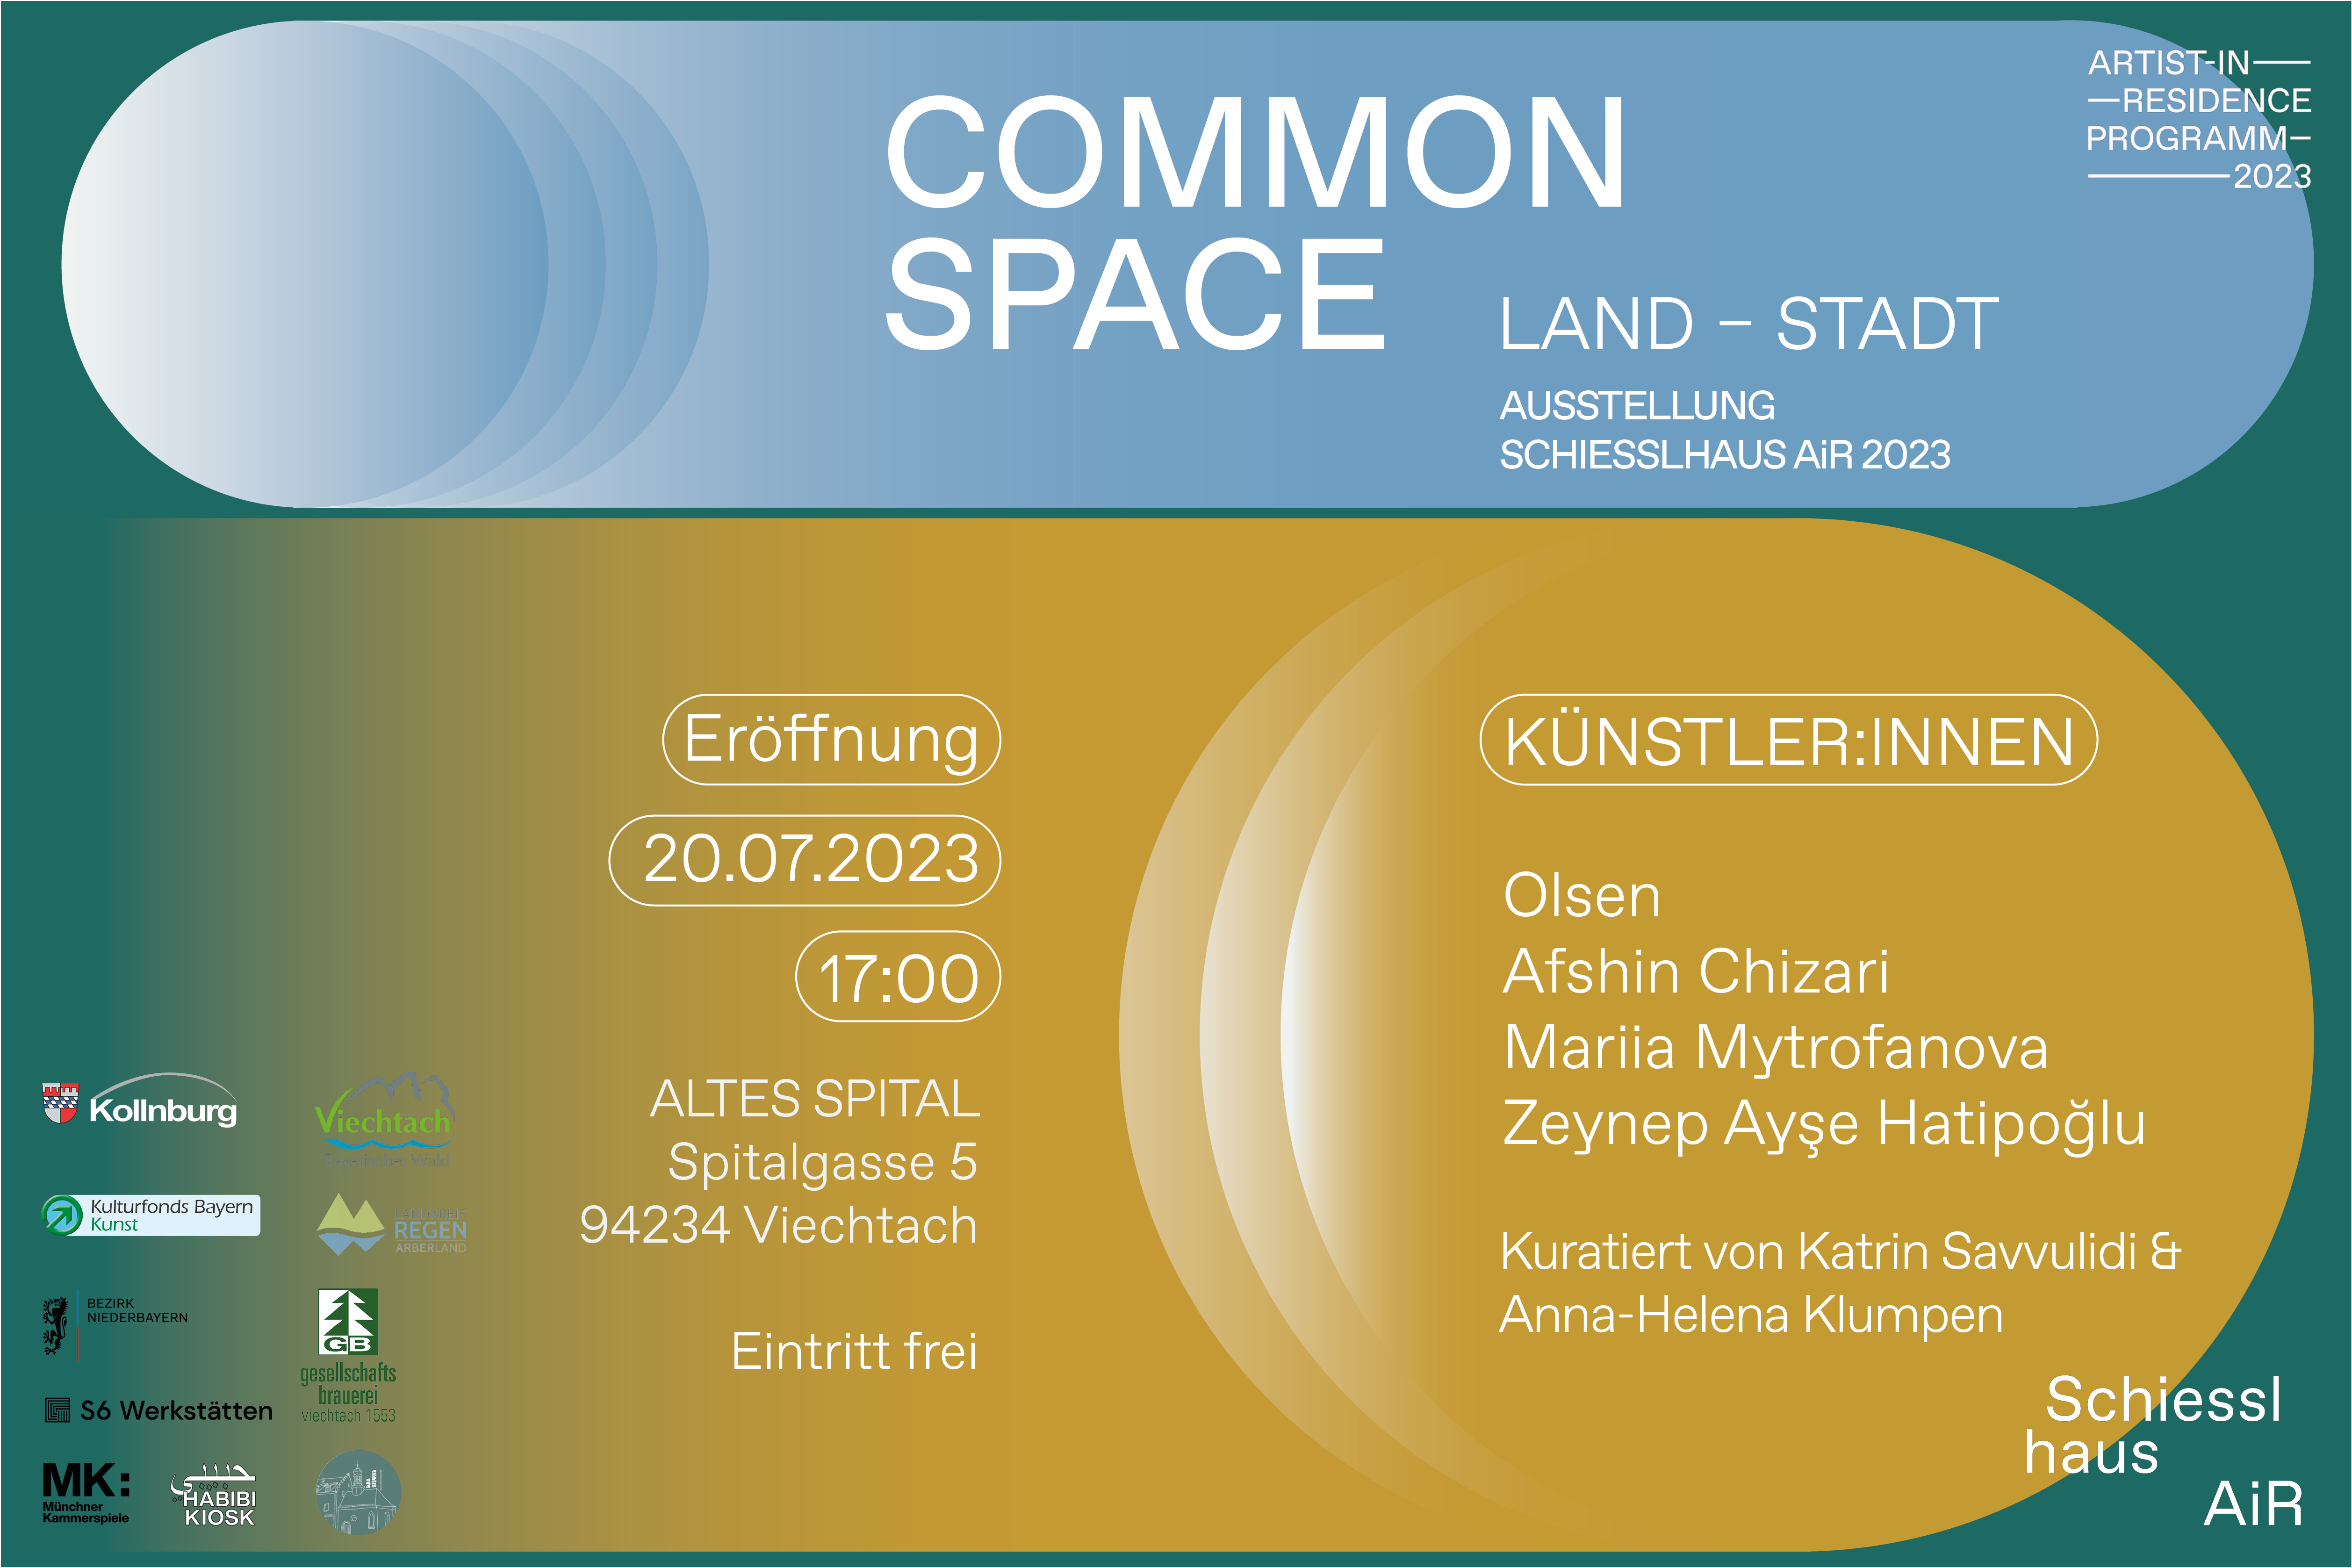 COMMON SPACE: LAND - STADT